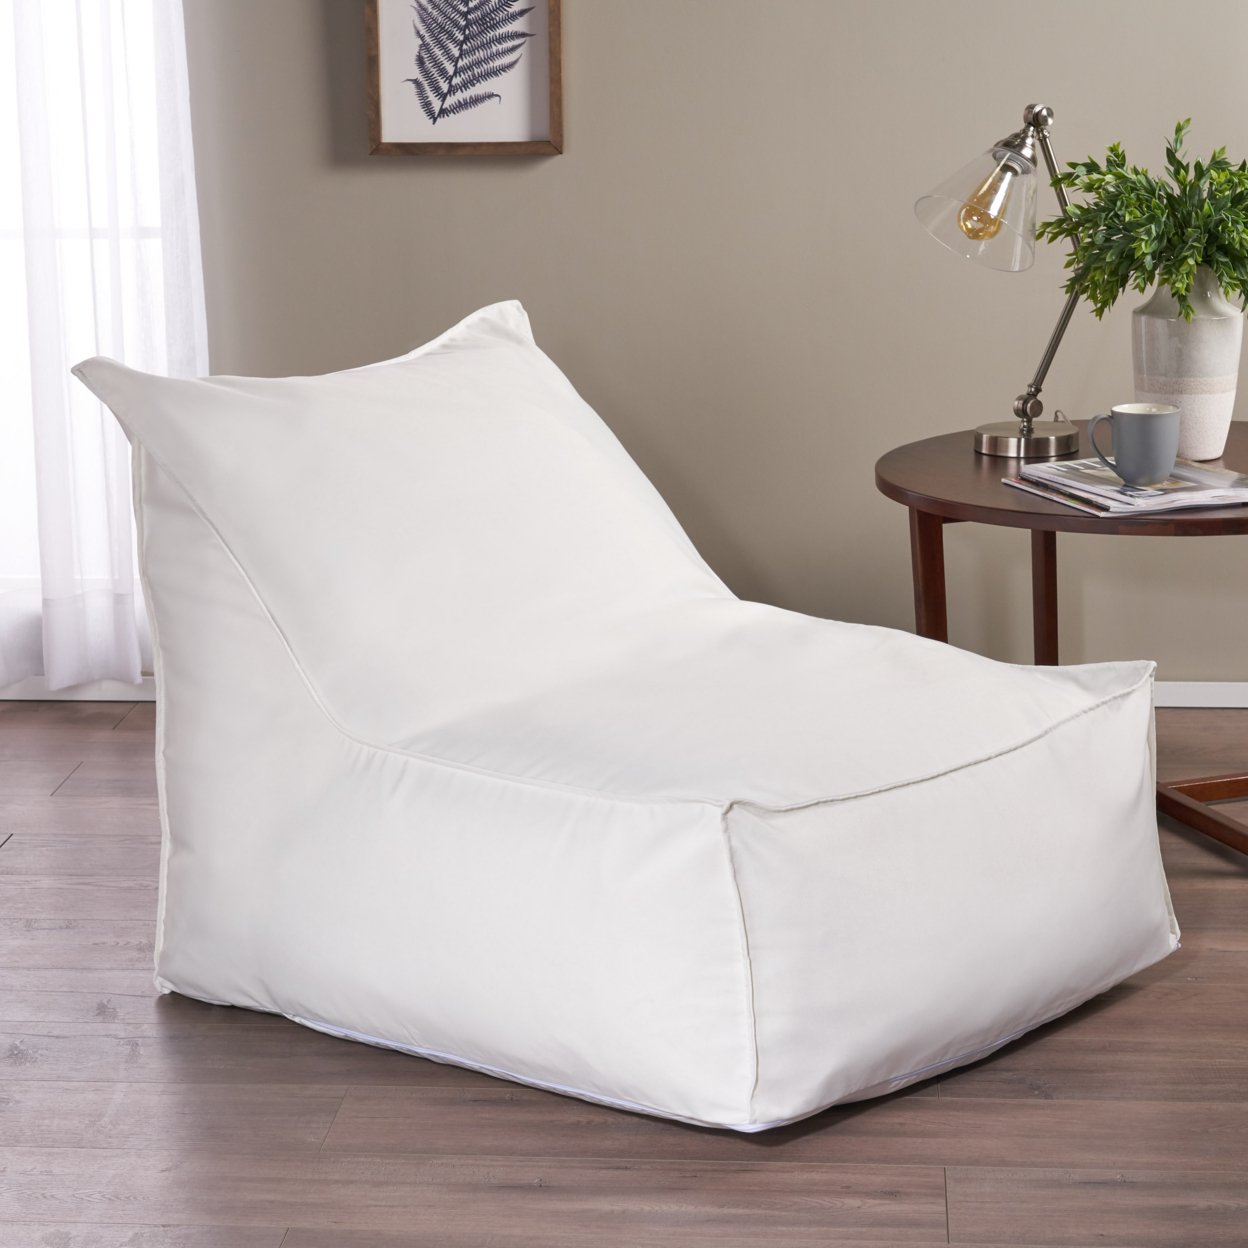 Frank Indoor Fabric Bean Bag Lounger - White